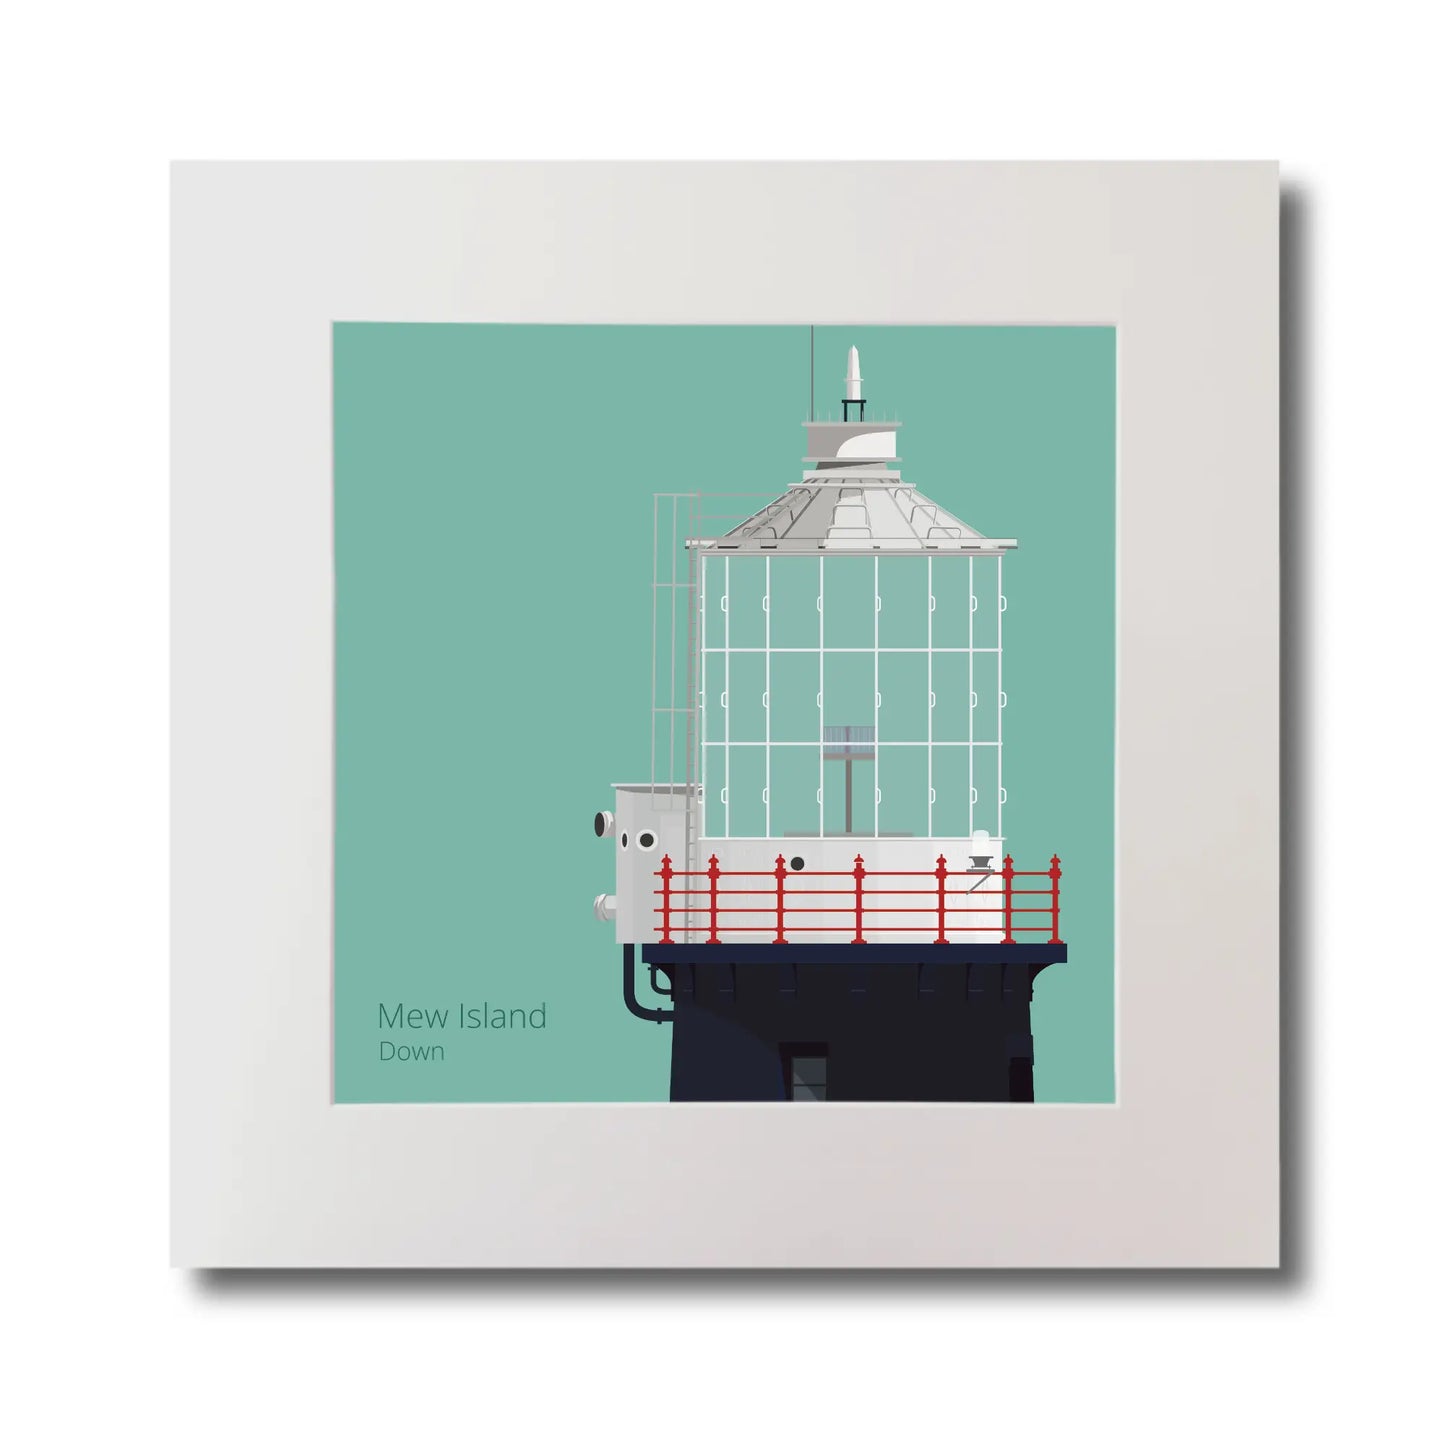 Illustration Mew Island lighthouse on an ocean green background, mounted and measuring 30x30cm.